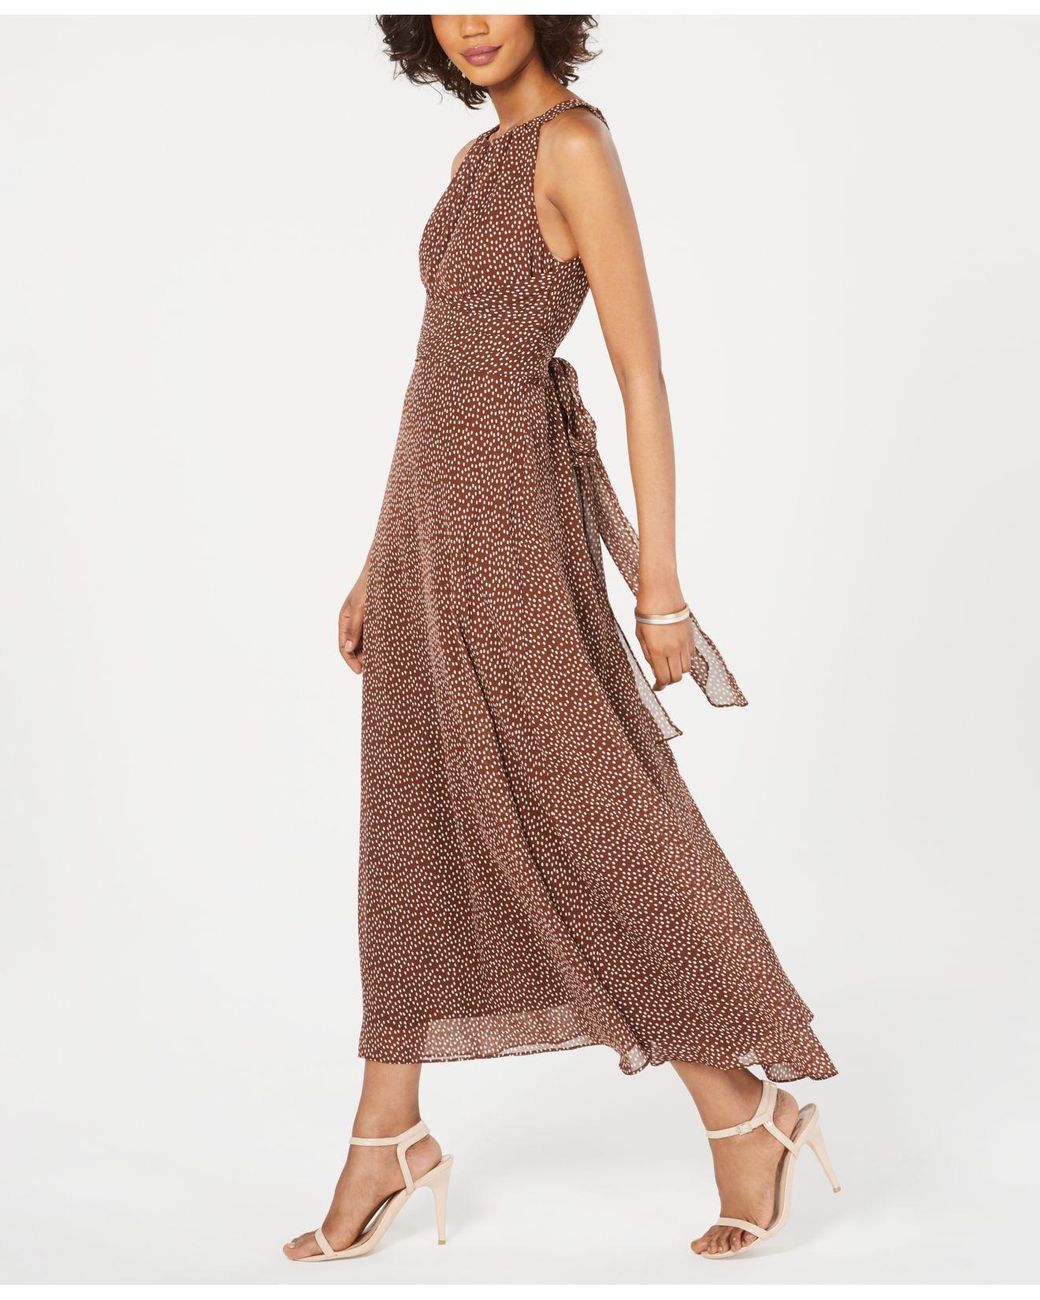 Adrianna Papell Darling Dot Midi Dress in Brown | Lyst